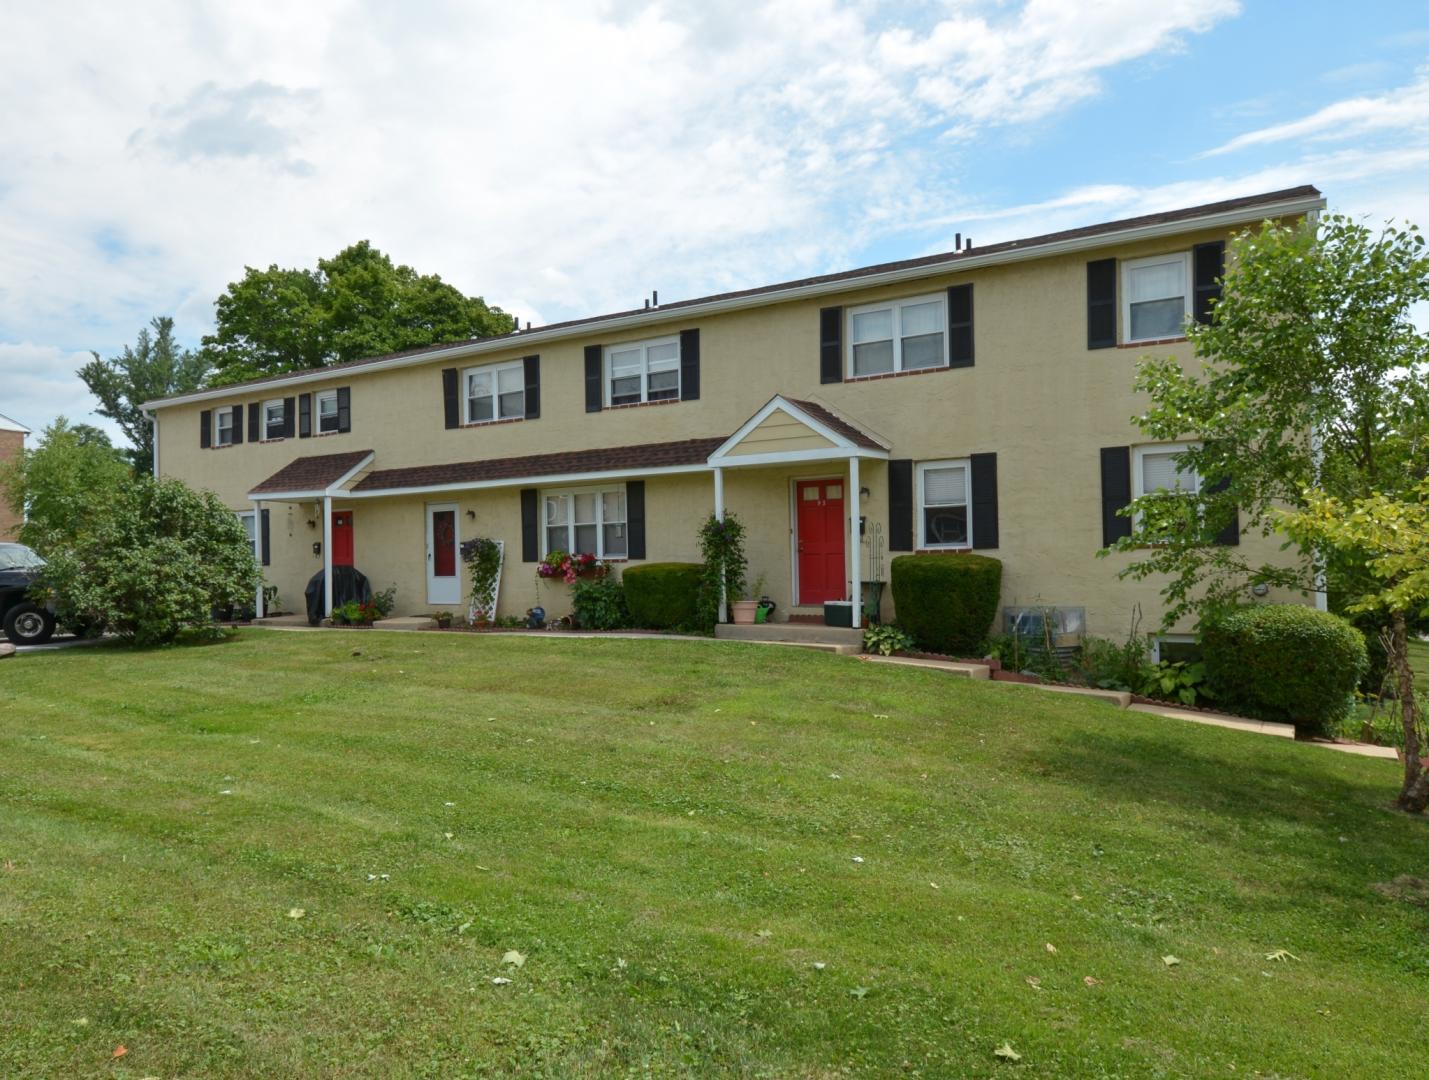 Paoli Apartments For Rent Paoli Place Apartments Townhomes Paoli Pa